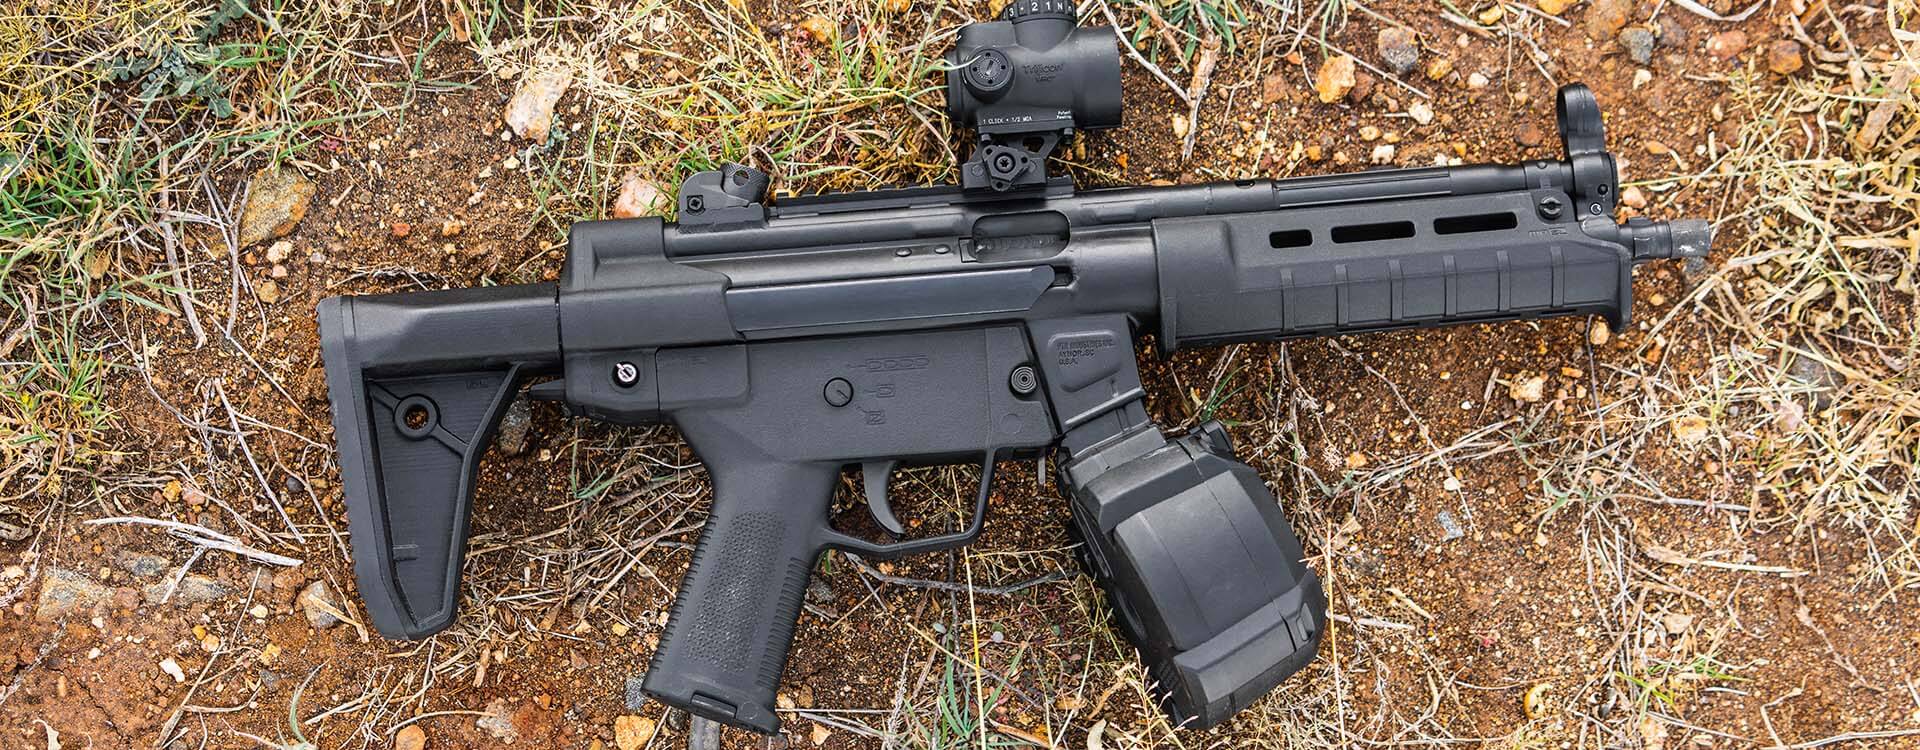 Magpul_stock_for_HK-MP5-HK94_MAG1250